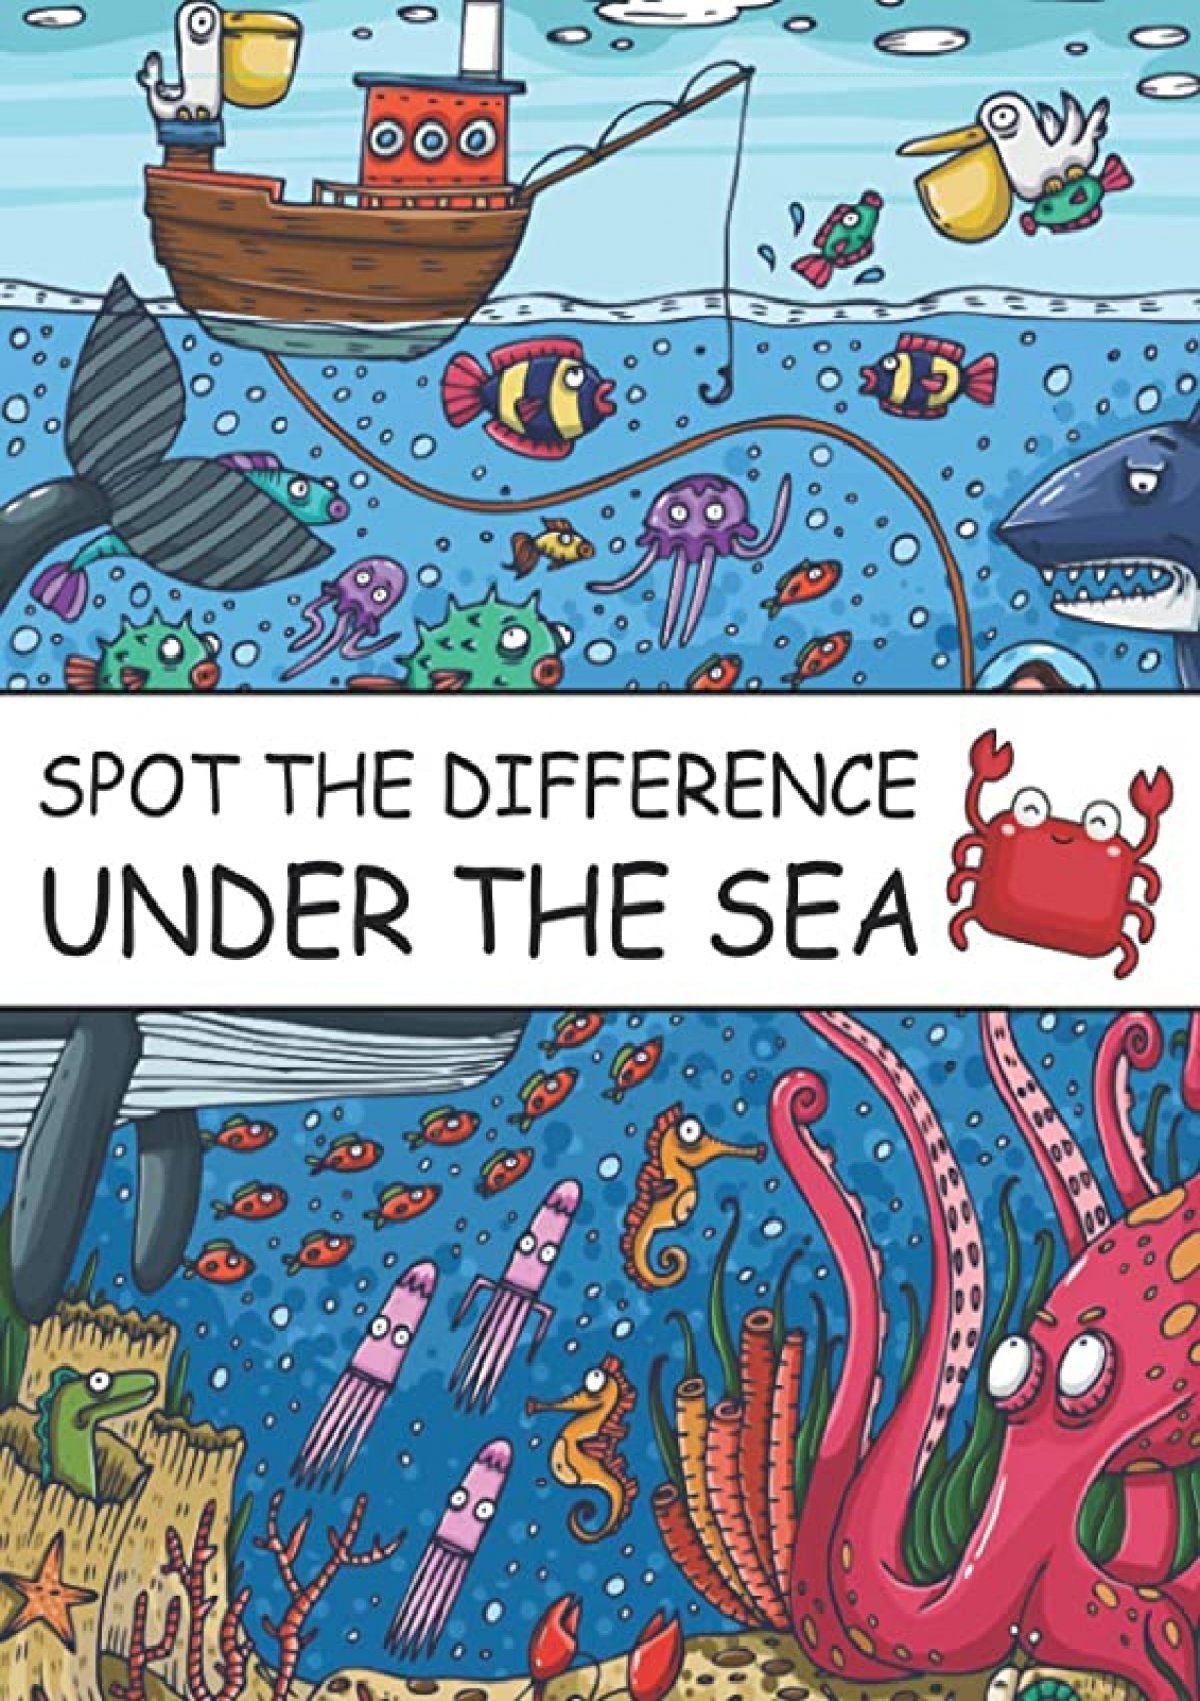 free⚡read⚡[pdf] Spot The Difference Under The Sea!: A Fun Search and ...